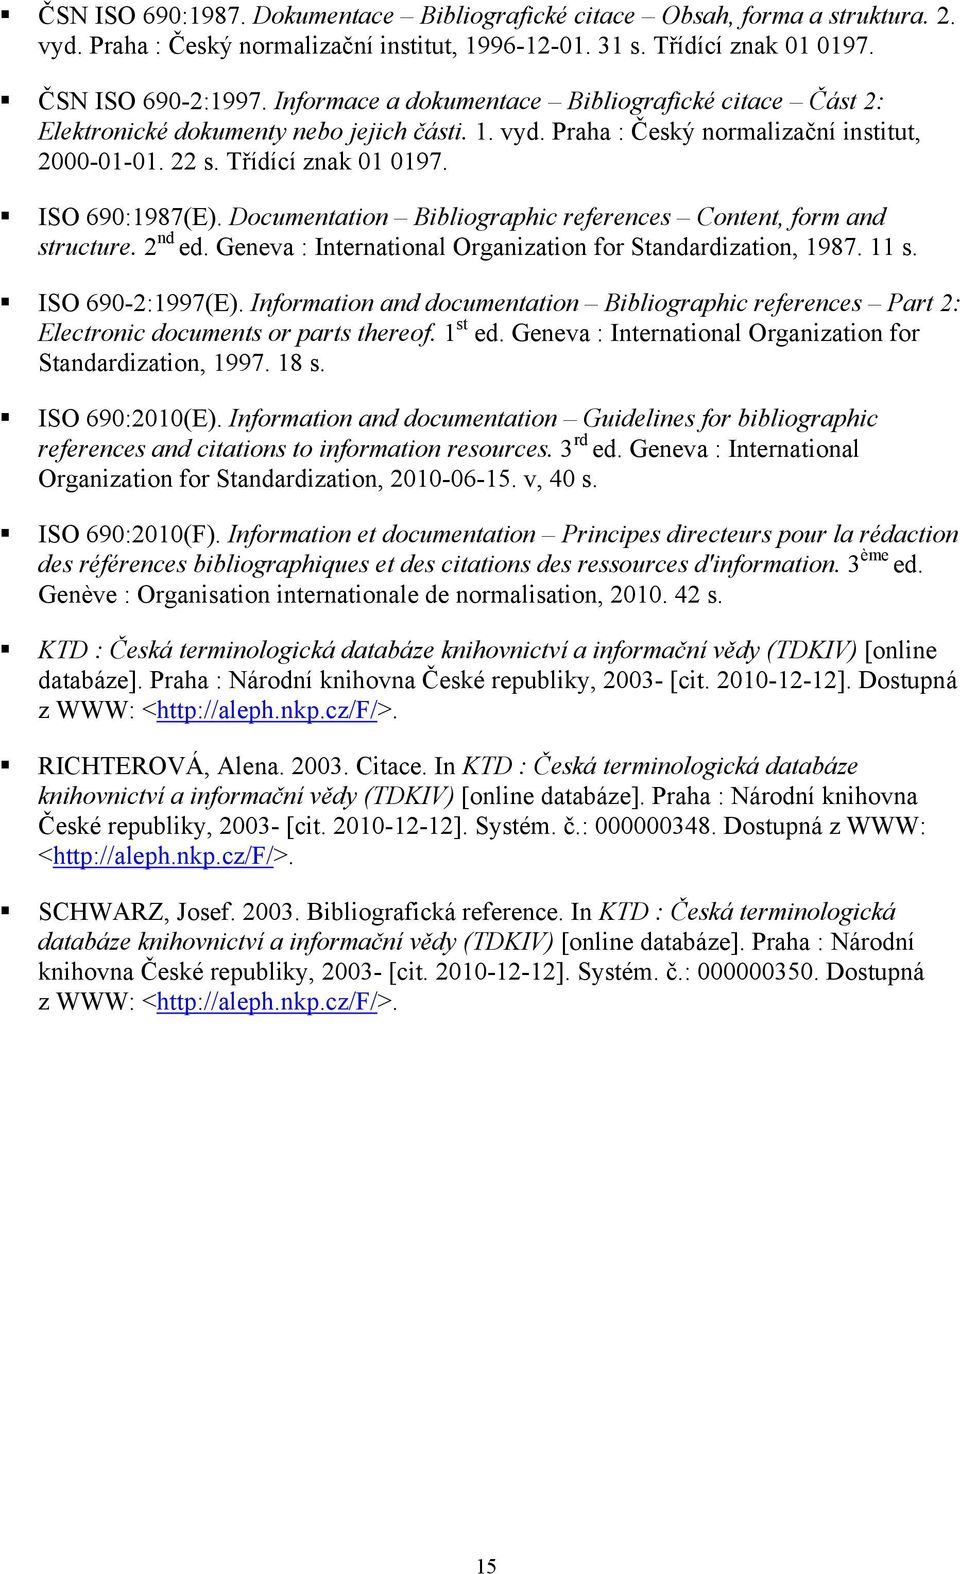 Documentation Bibliographic references Content, form and structure. 2 nd ed. Geneva : International Organization for Standardization, 1987. 11 s. ISO 690-2:1997(E).